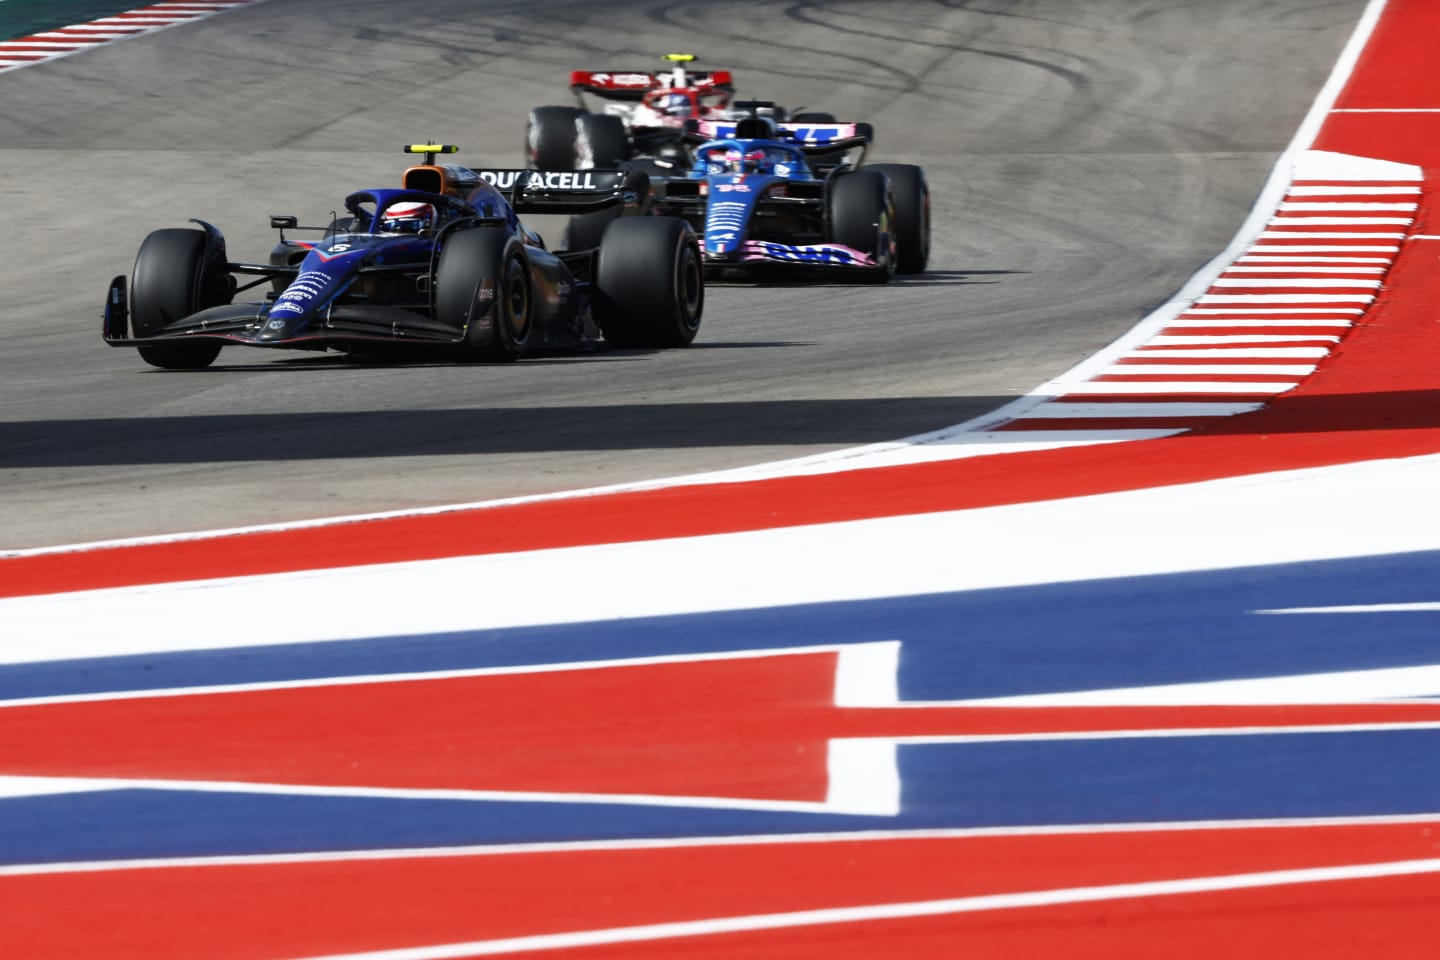 AUSTIN, TEXAS - OCTOBER 23: Nicholas Latifi of Canada driving the (6) Williams FW44 Mercedes on track during the F1 Grand Prix of USA at Circuit of The Americas on October 23, 2022 in Austin, Texas. (Photo by Chris Graythen/Getty Images)